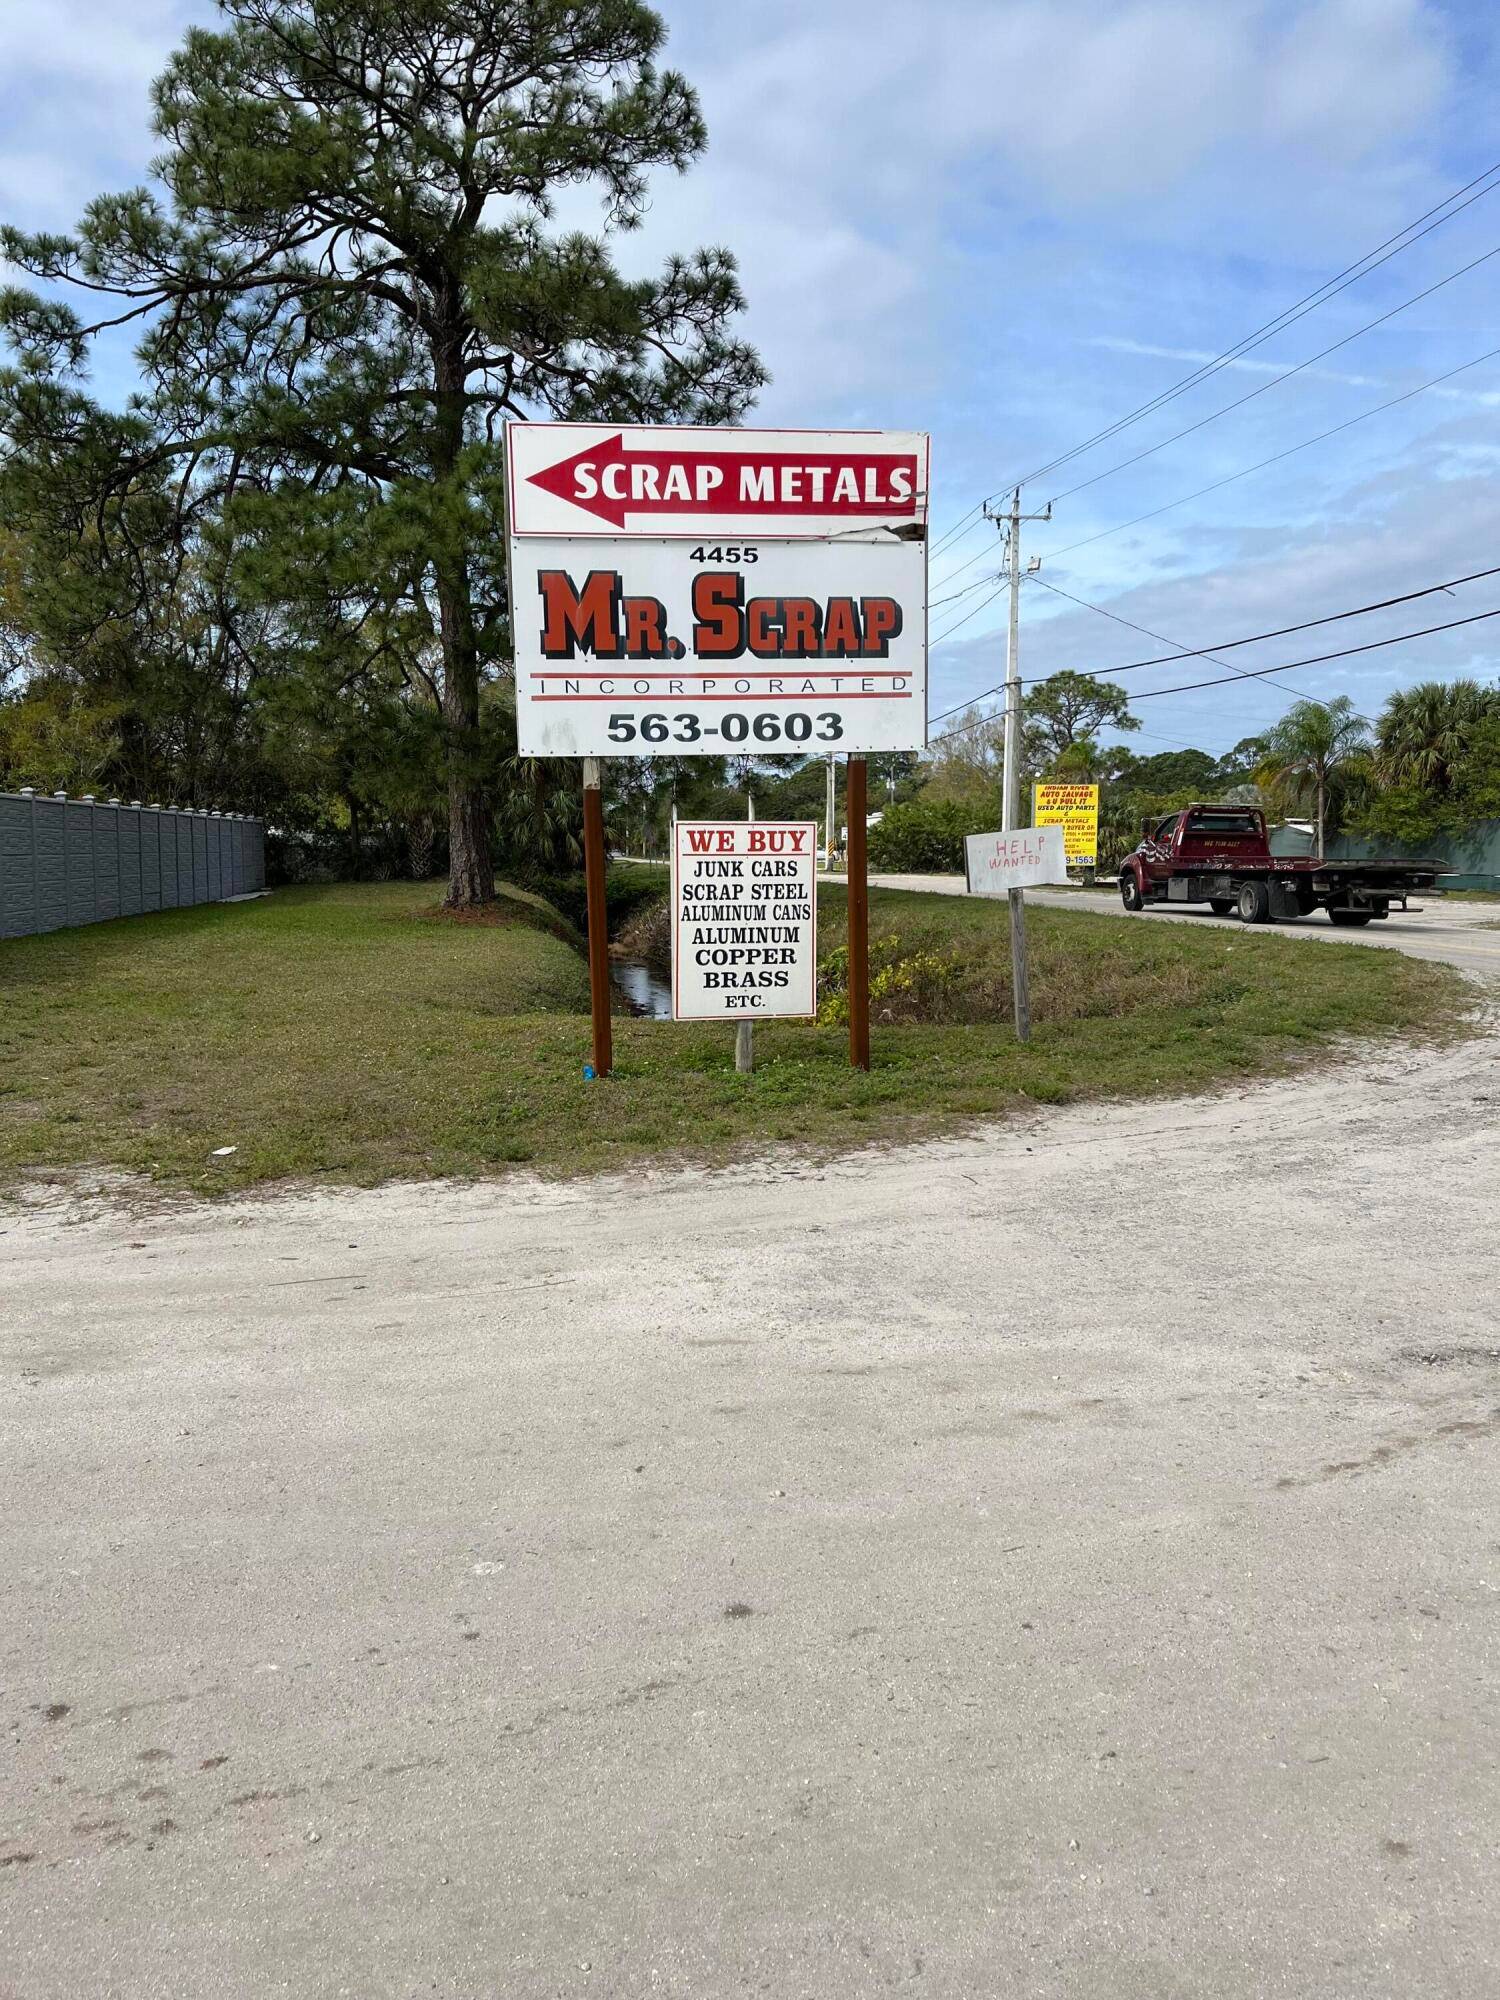 Mr Scrap has been a fixture of Vero Beach, FL since first established in 1995.